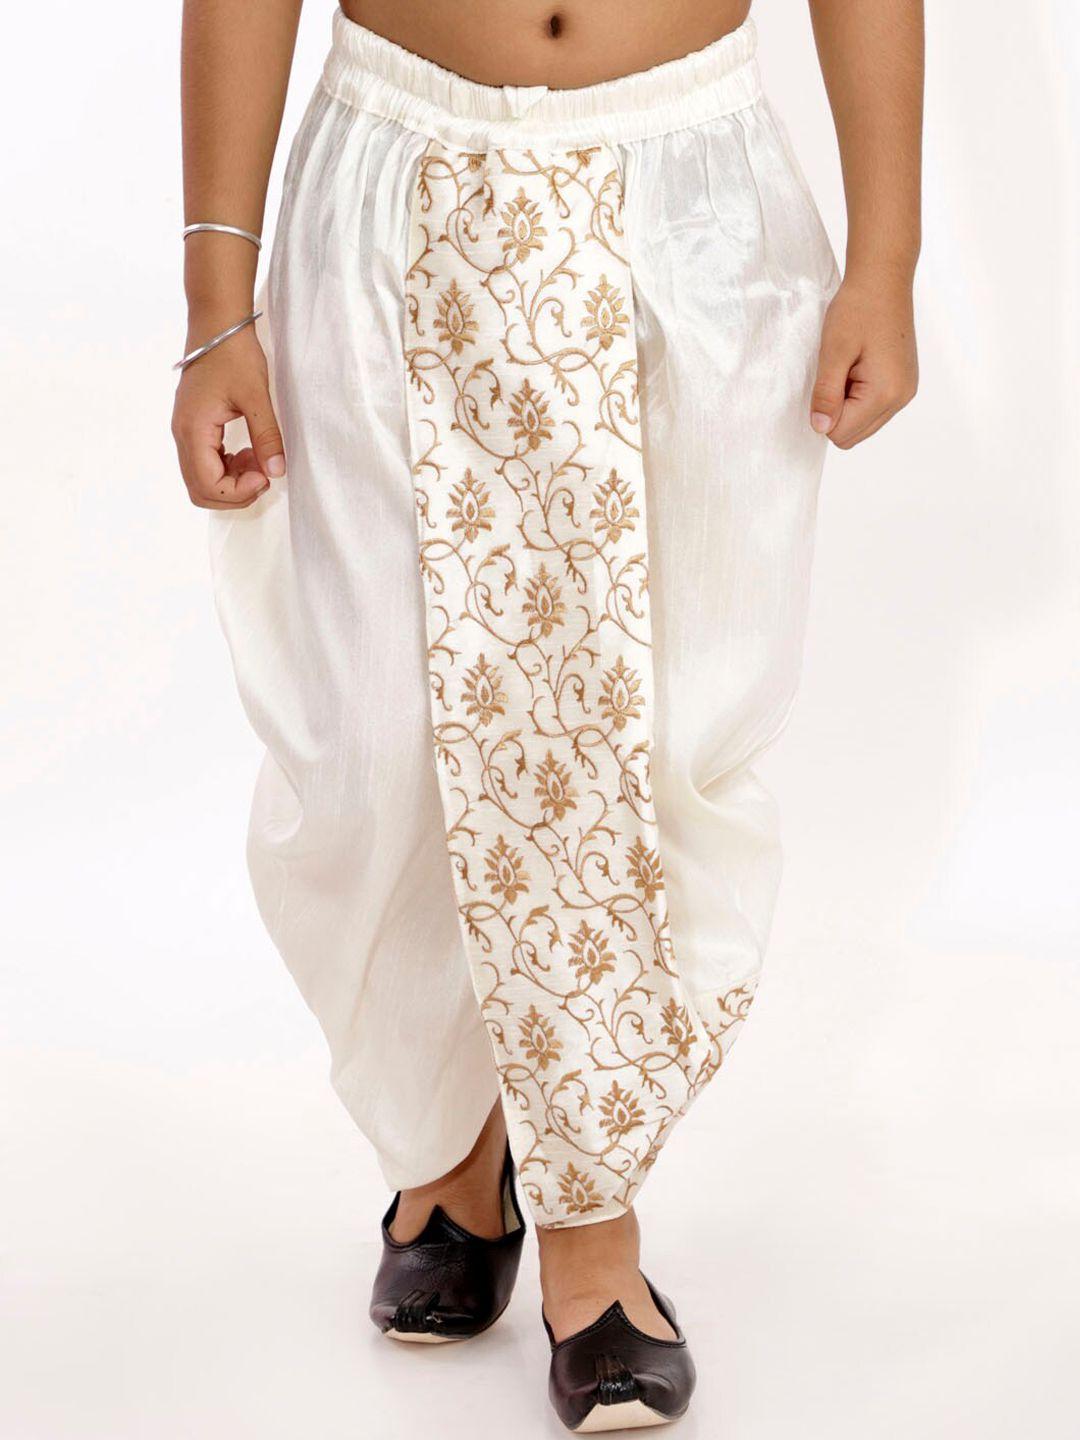 vastramay boys white & gold embroidered ready-to-wear dhoti